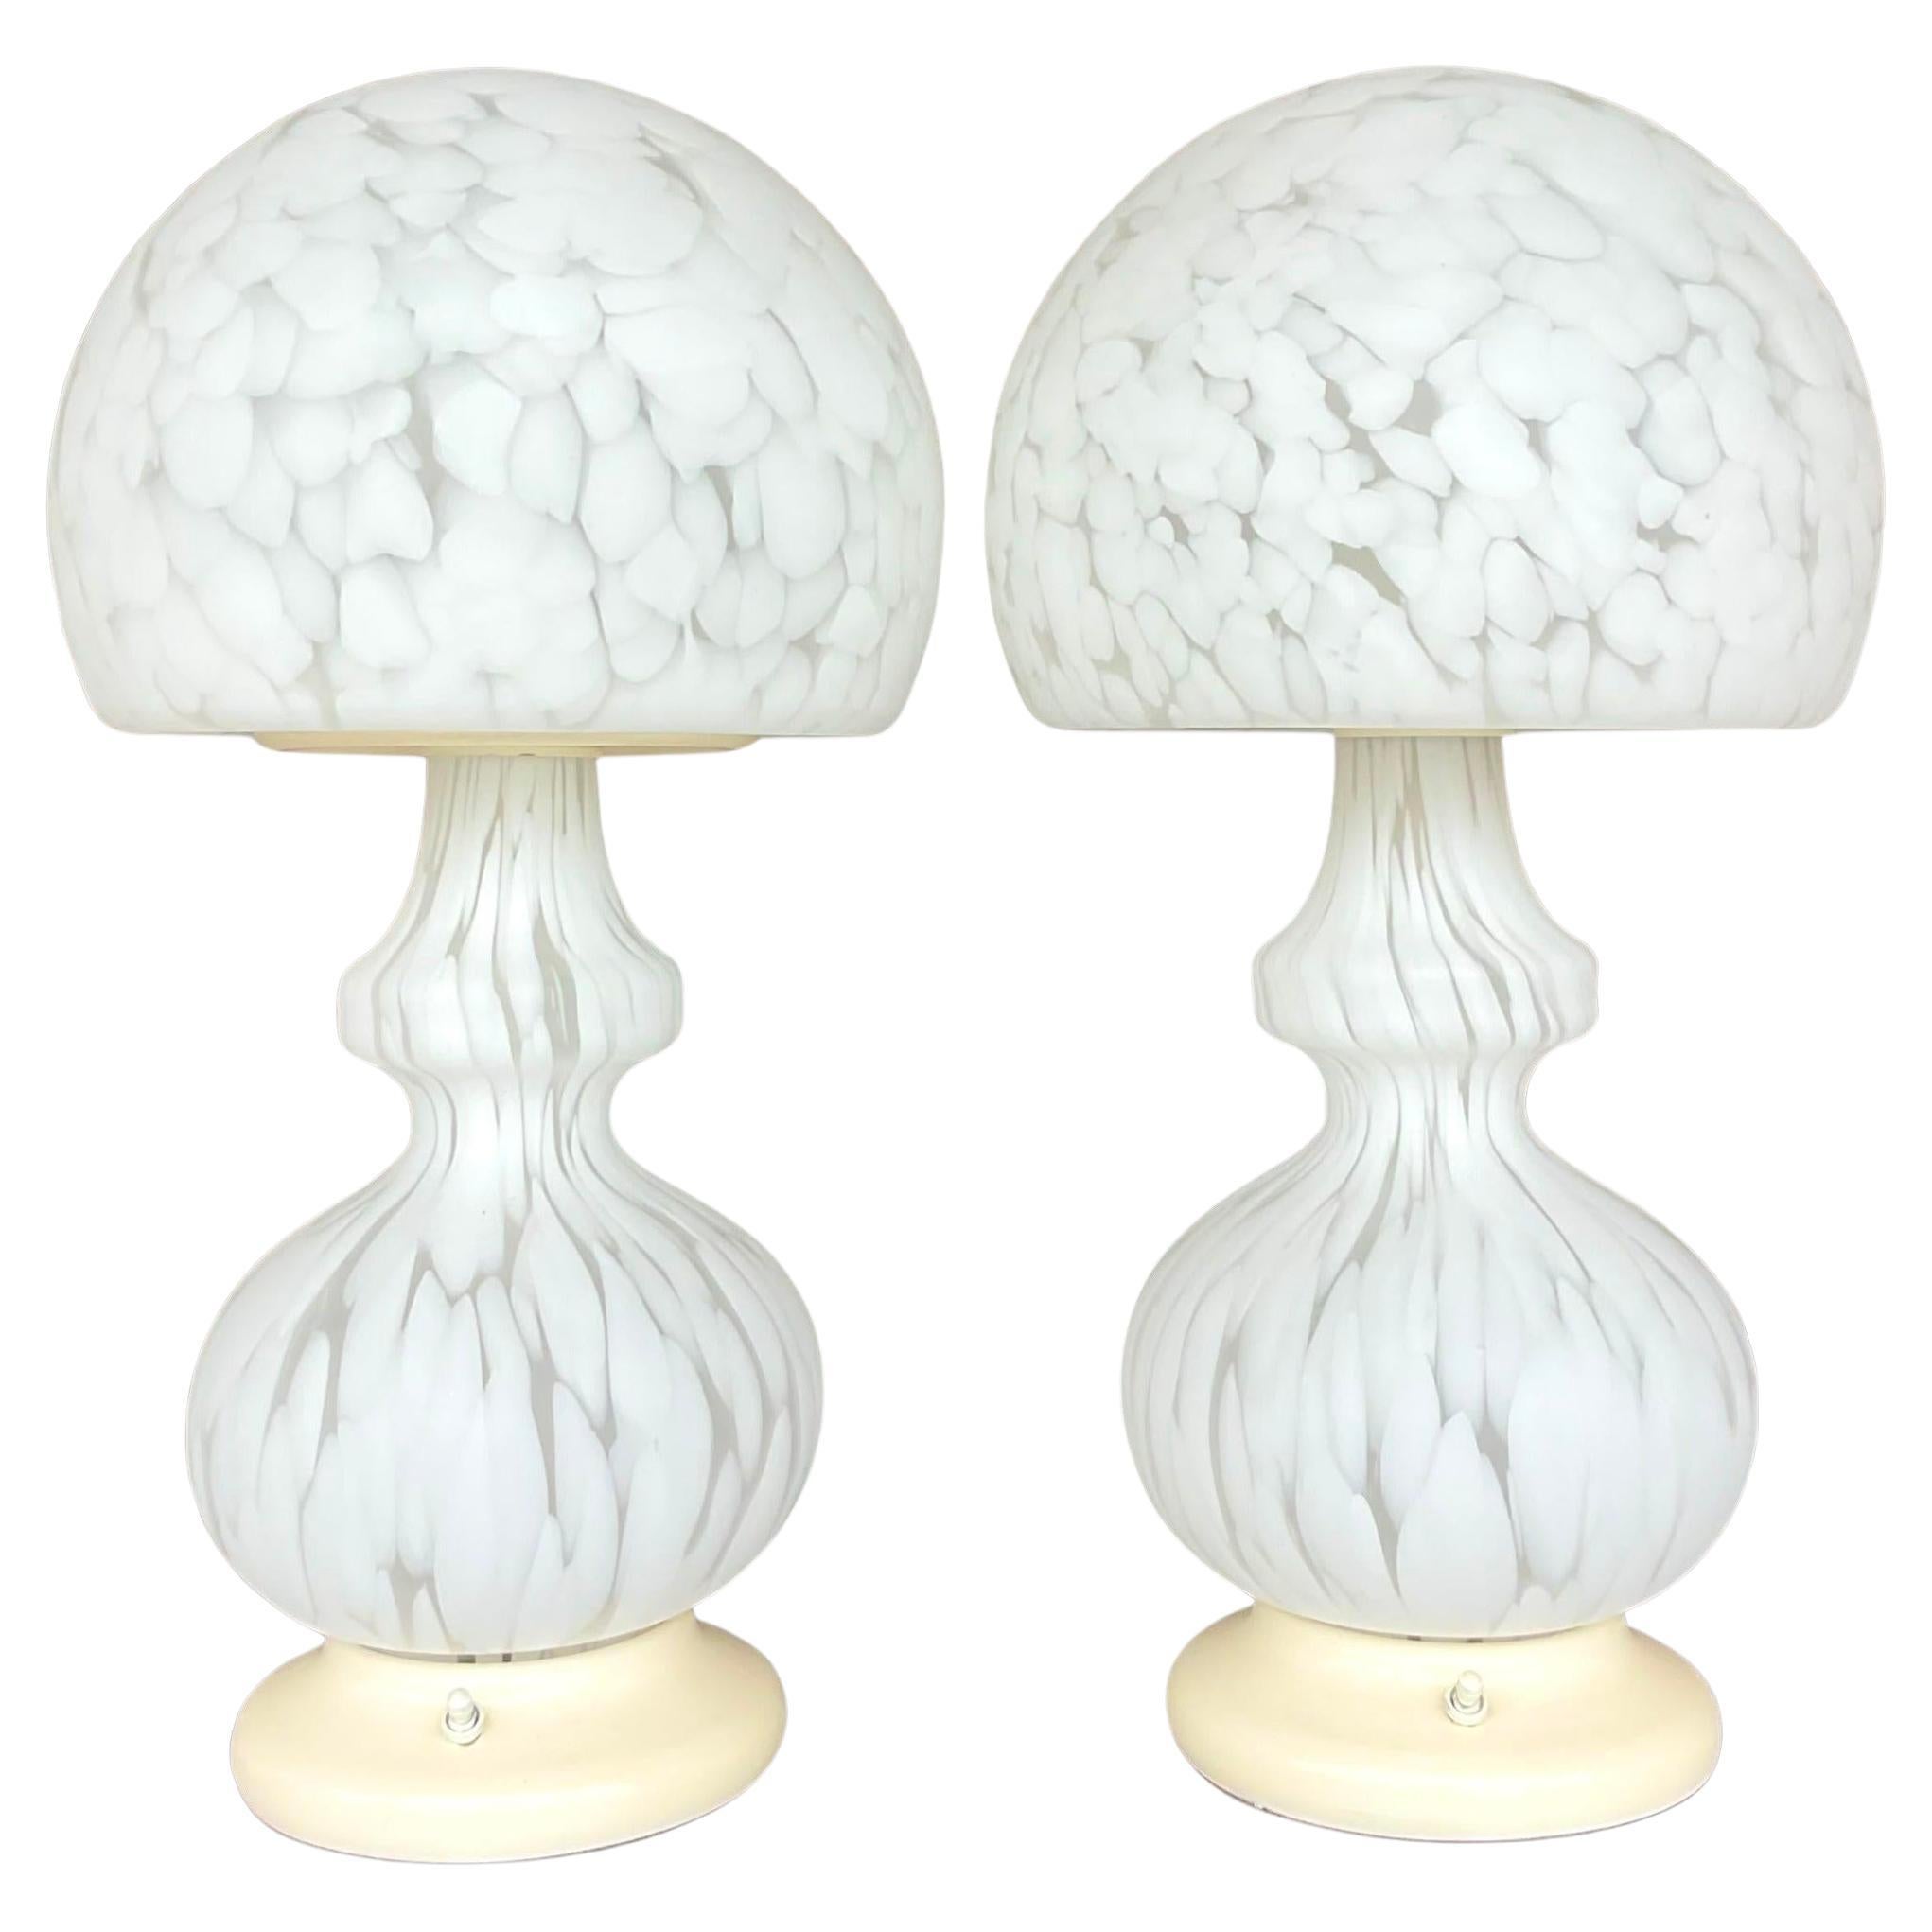 Vintage Globe Lamps After Murano for Someroso for Laurel Lighting - a Pair For Sale